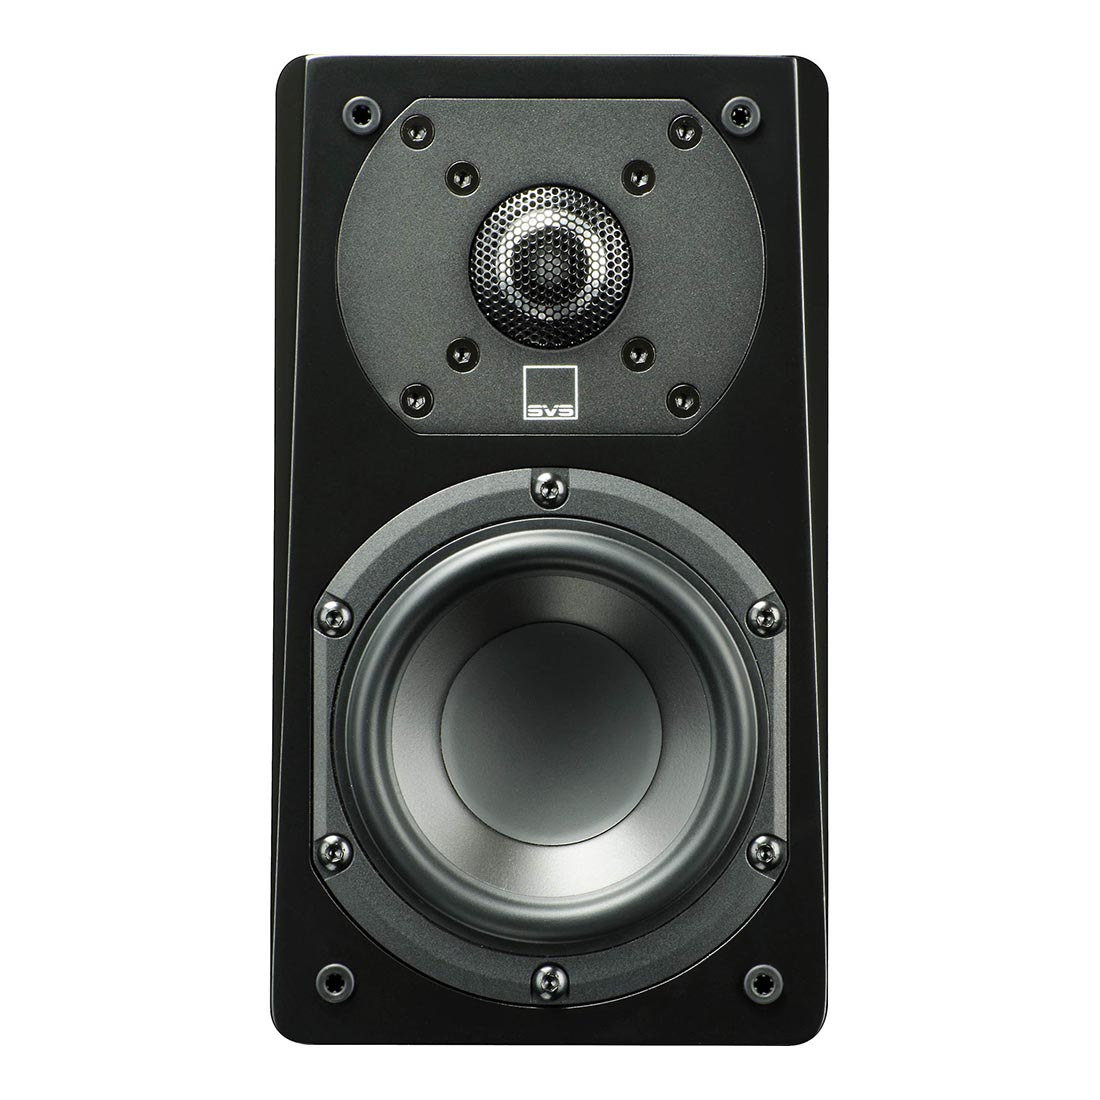 SVS Prime Satellite Compact On Wall Speakers